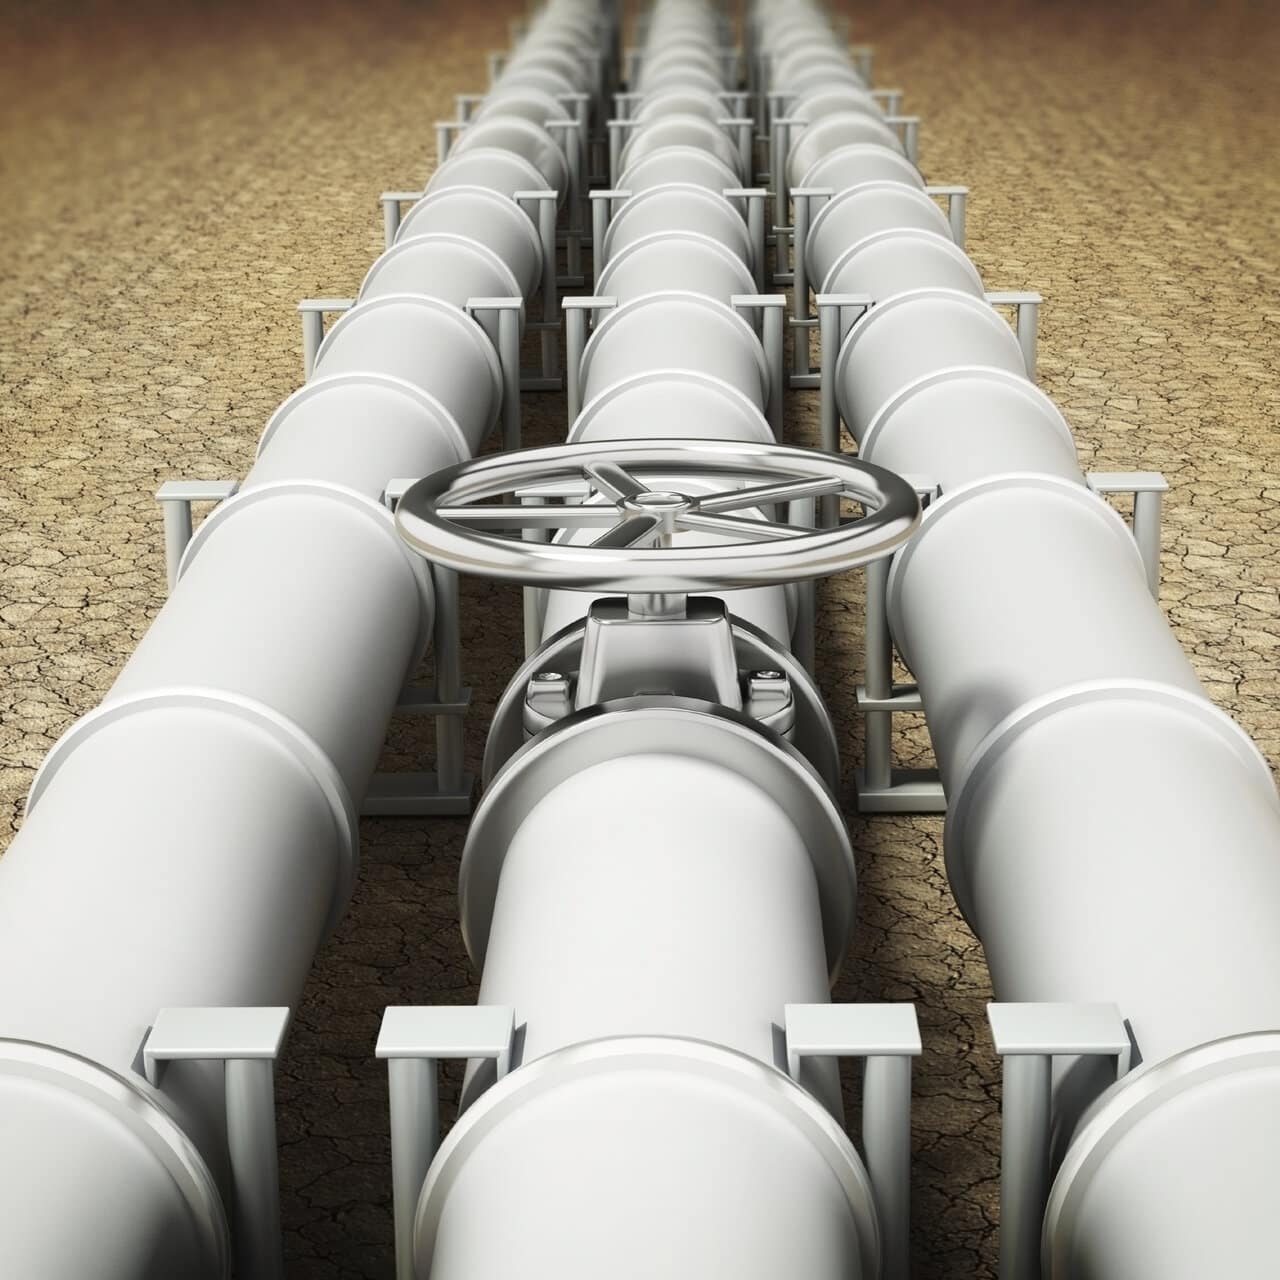 Natural Gas Futures: Downside seen limited